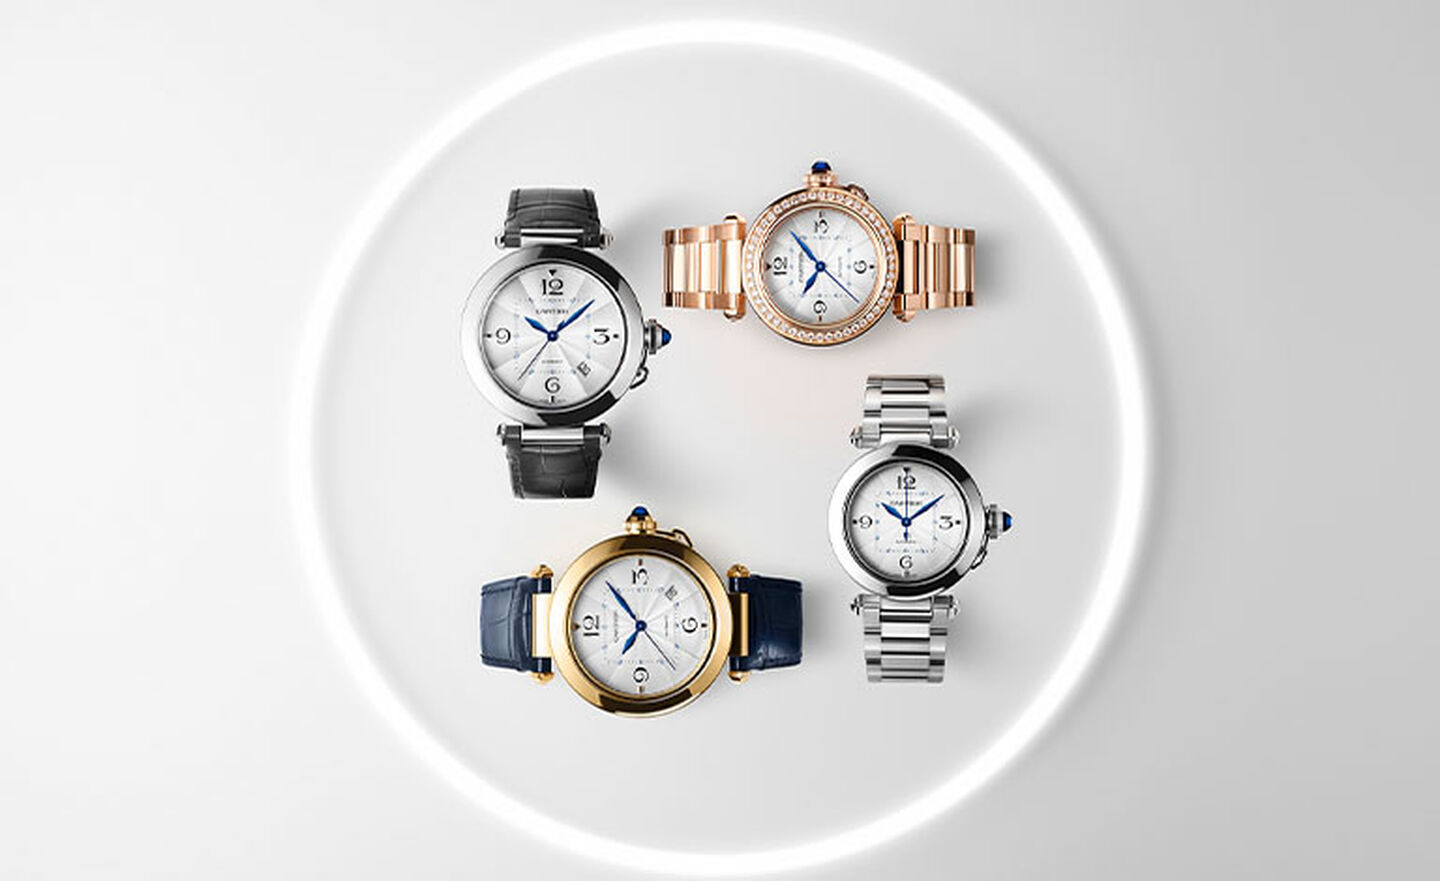 Four Cartier Pasha watches in a circle